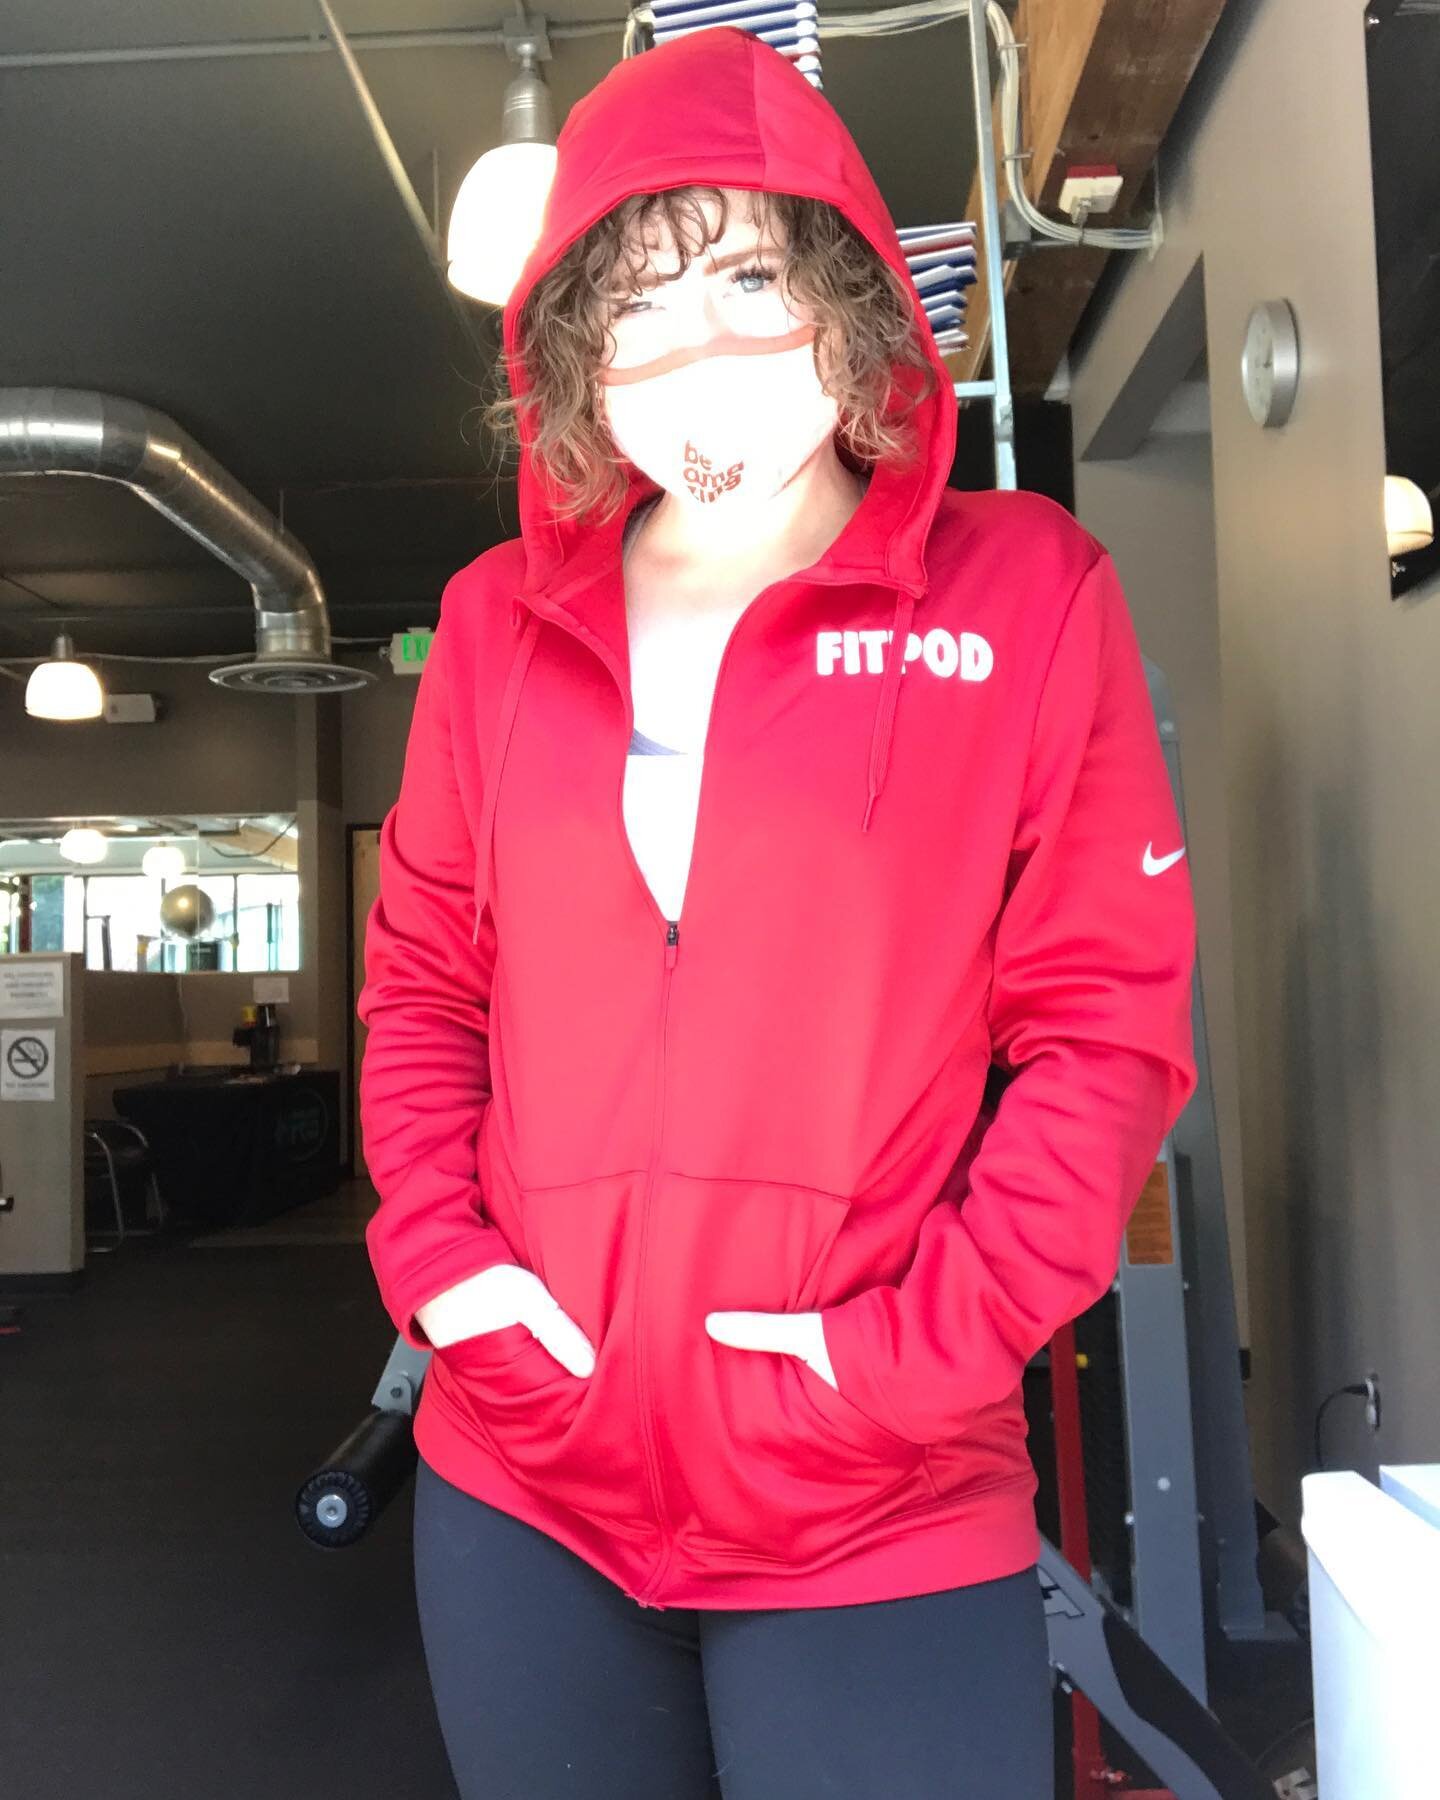 Coach Kate&rsquo;s go to warmup routine in the new FITPOD warmup gear! This Nike Therma-FIT fleece is so warm you&rsquo;re guaranteed to be sweating before the warmup is over!

Jealous? No worries! This FITPOD gear isn&rsquo;t just for our coaches! C